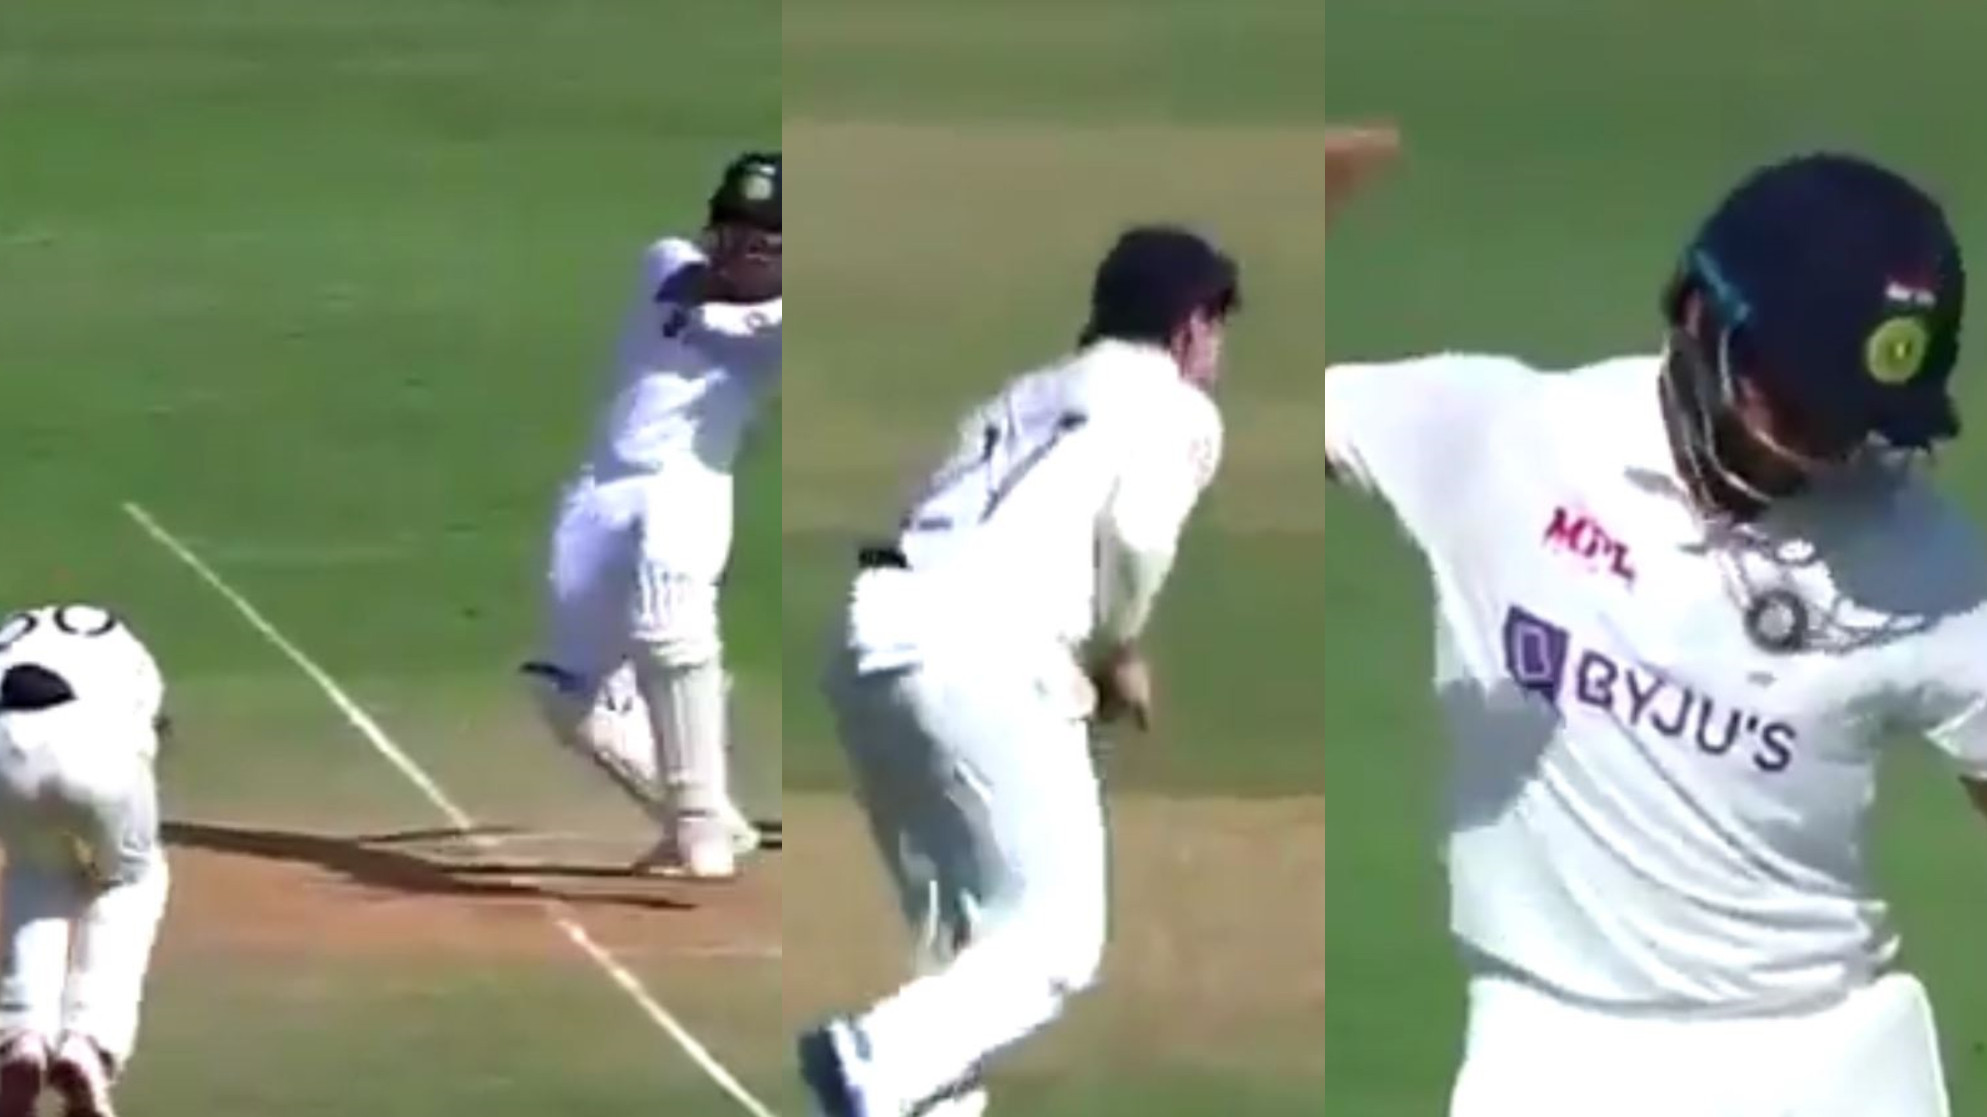 IND v ENG 2021: WATCH- Pujara falls to an unusual dismissal; gets caught by mid-wicket after ball deflects off short-leg